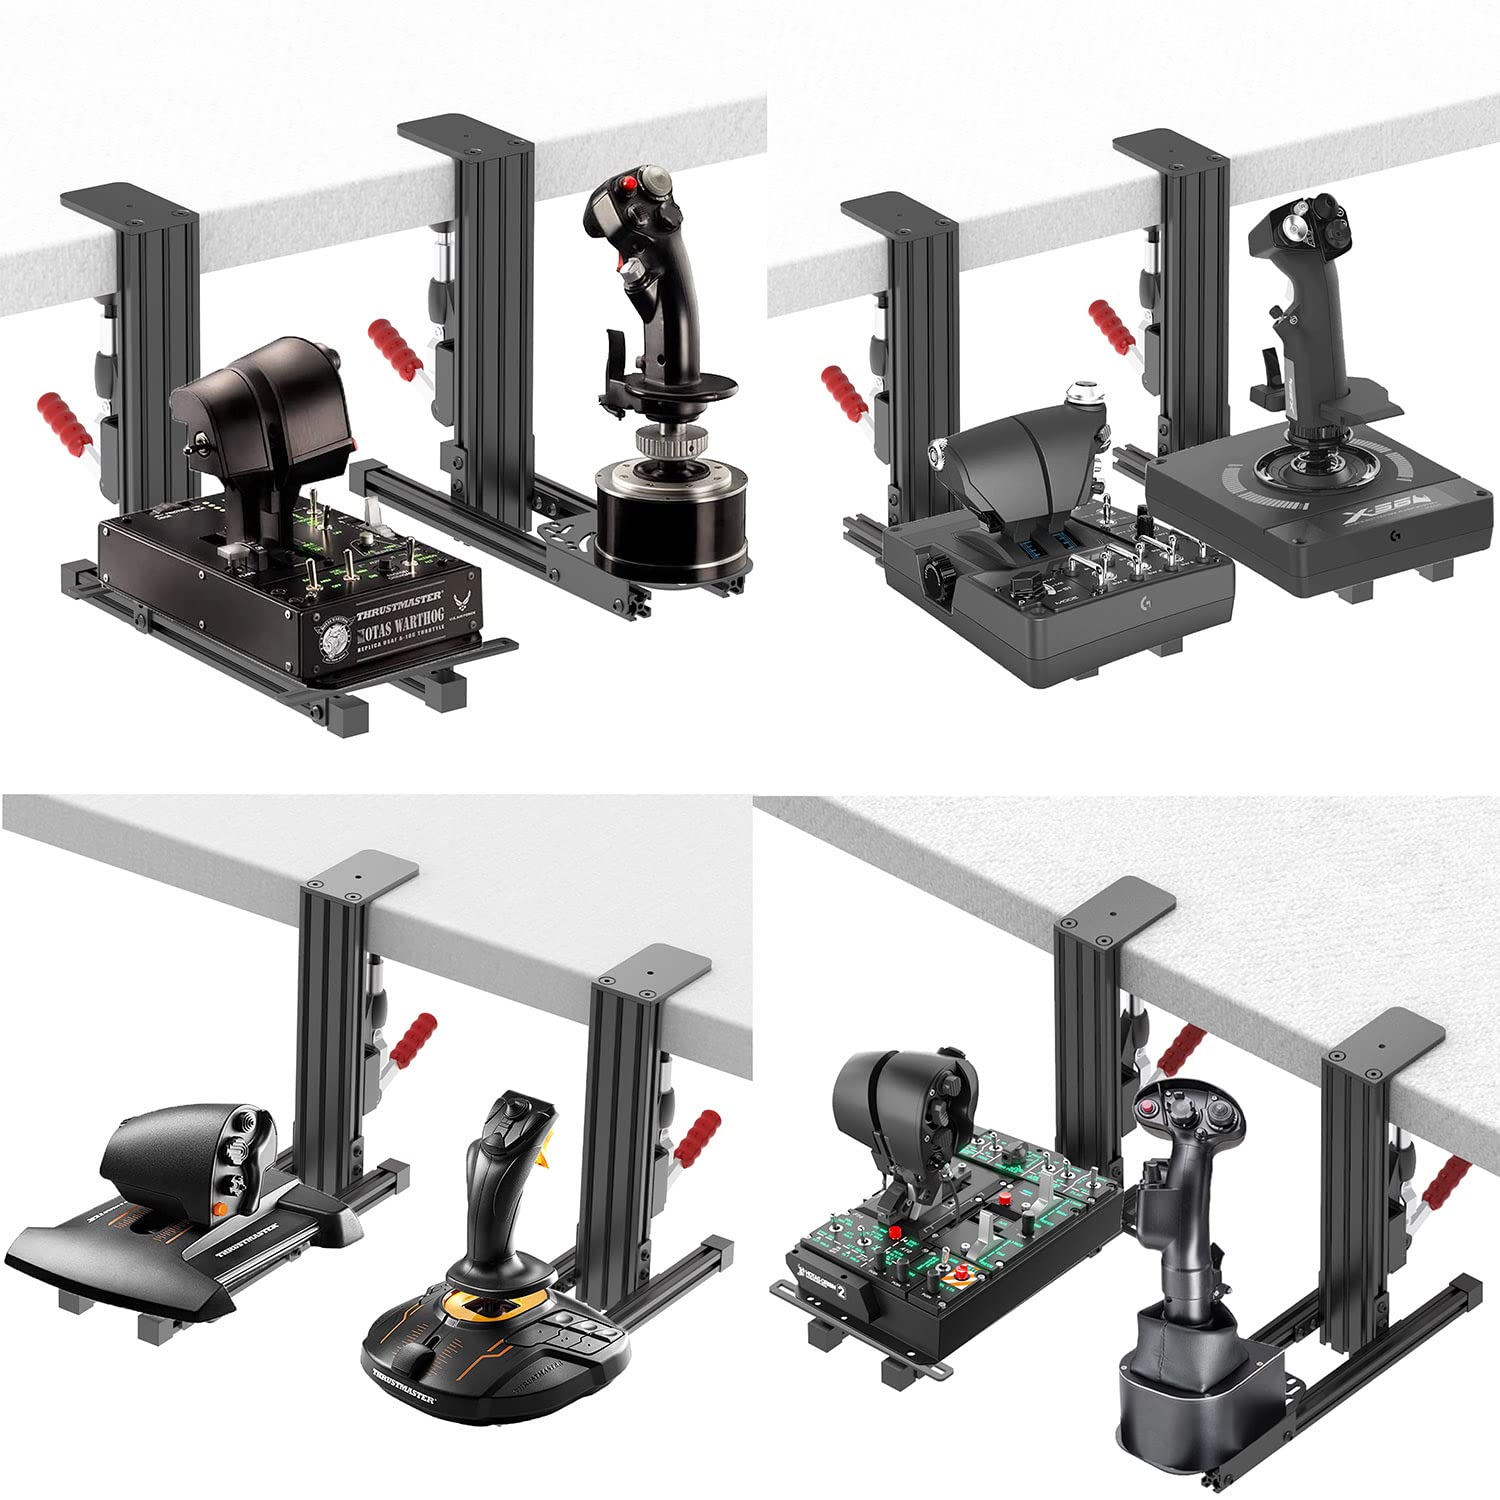 2 Set The Desk Mount for The Flight Sim Game Joystick, Throttle and Hotas  Systems Compatible with Logitech X56, X52, X52 Pro, Thrustmaster T-Flight